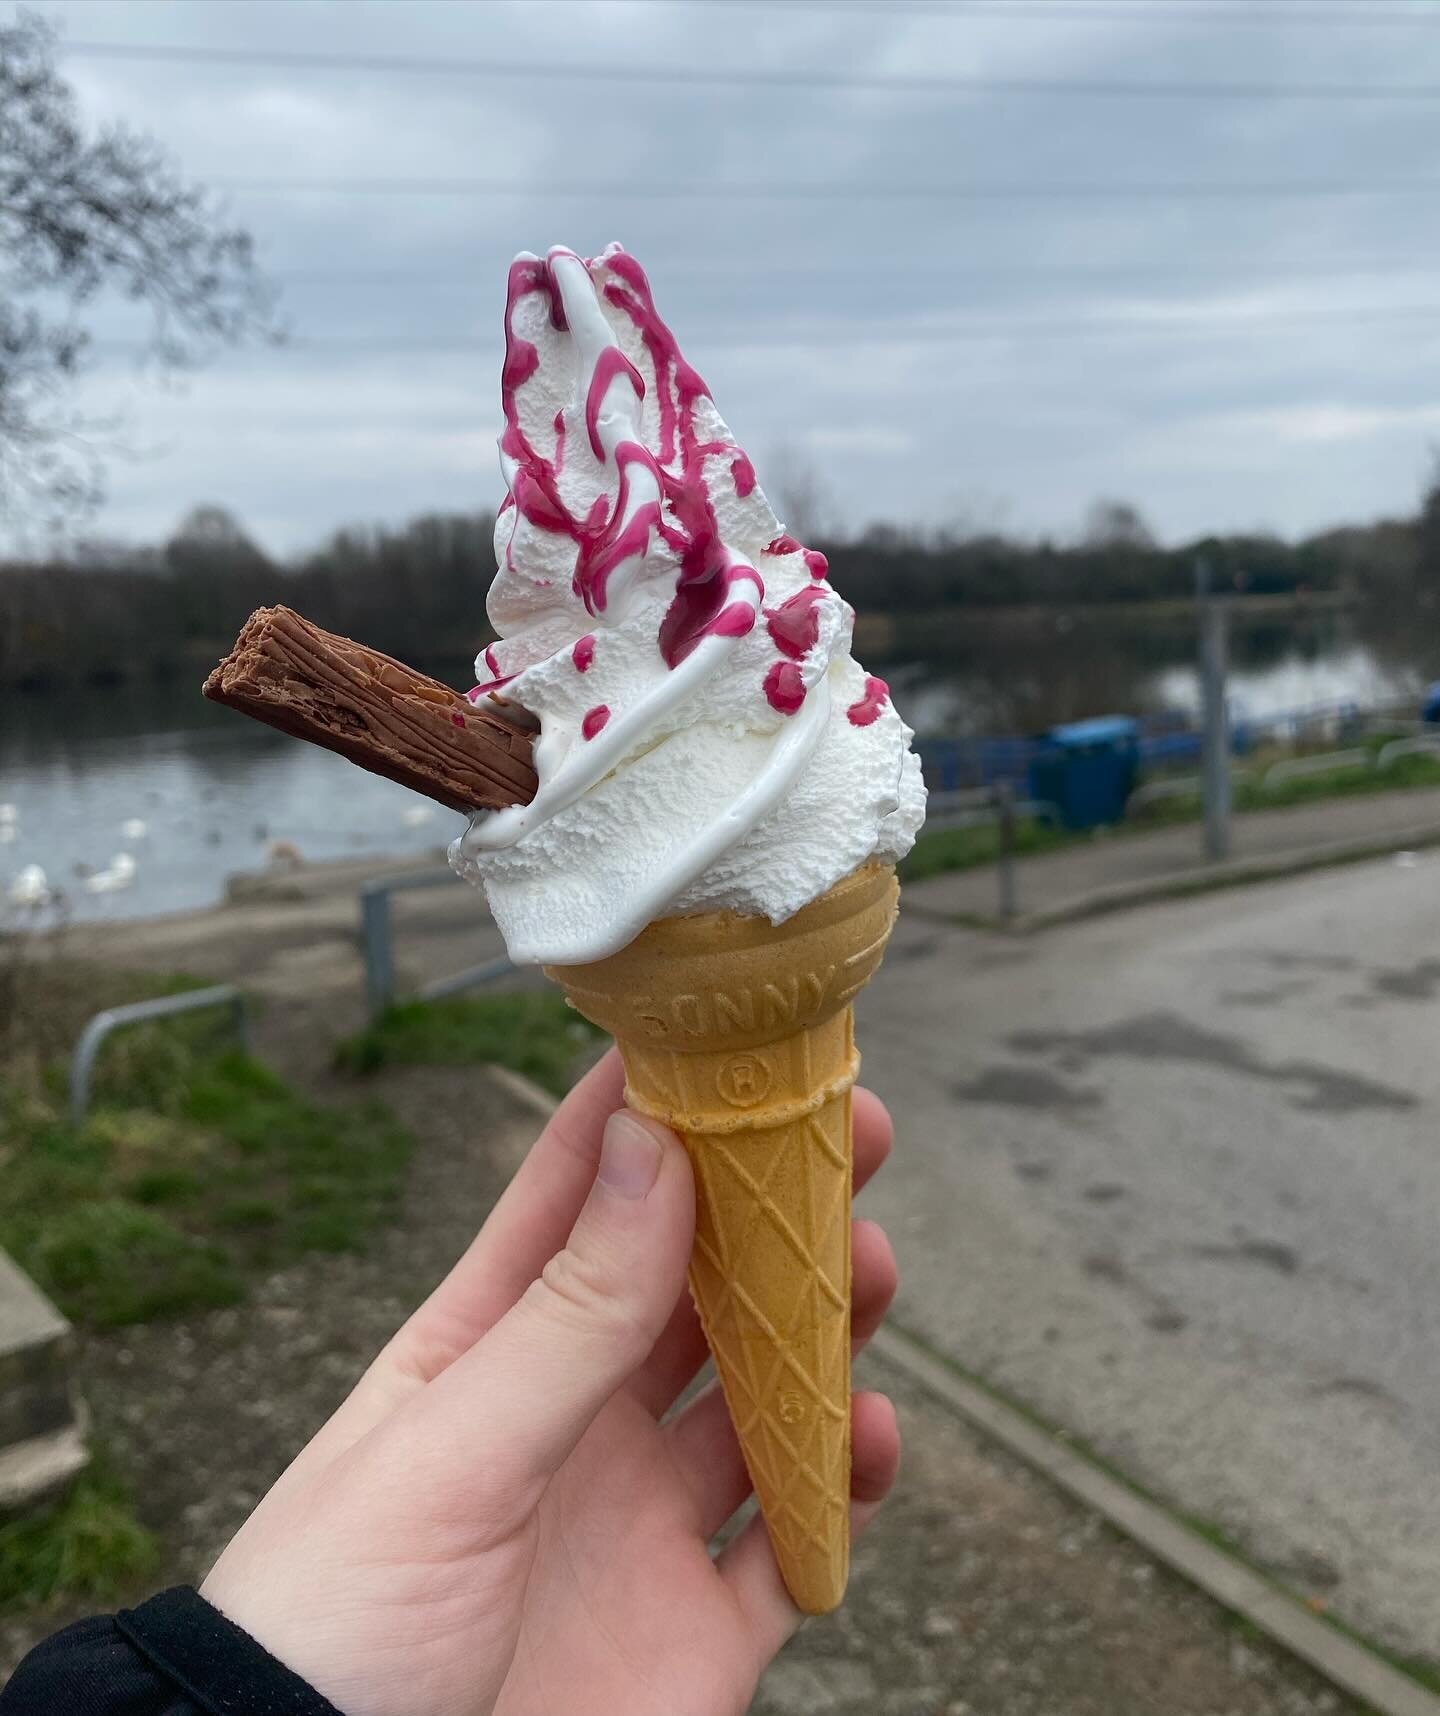 There&rsquo;s nothing better than just a flake and a bit of raspberry sauce 🍦

#lewisbrosicecream #icecream #icecreamlover #flake #icecreamvan #sweet #sweettreats #vanlife #dessert #local #warrington #manchester #manchesterfood #cheshire #warrington